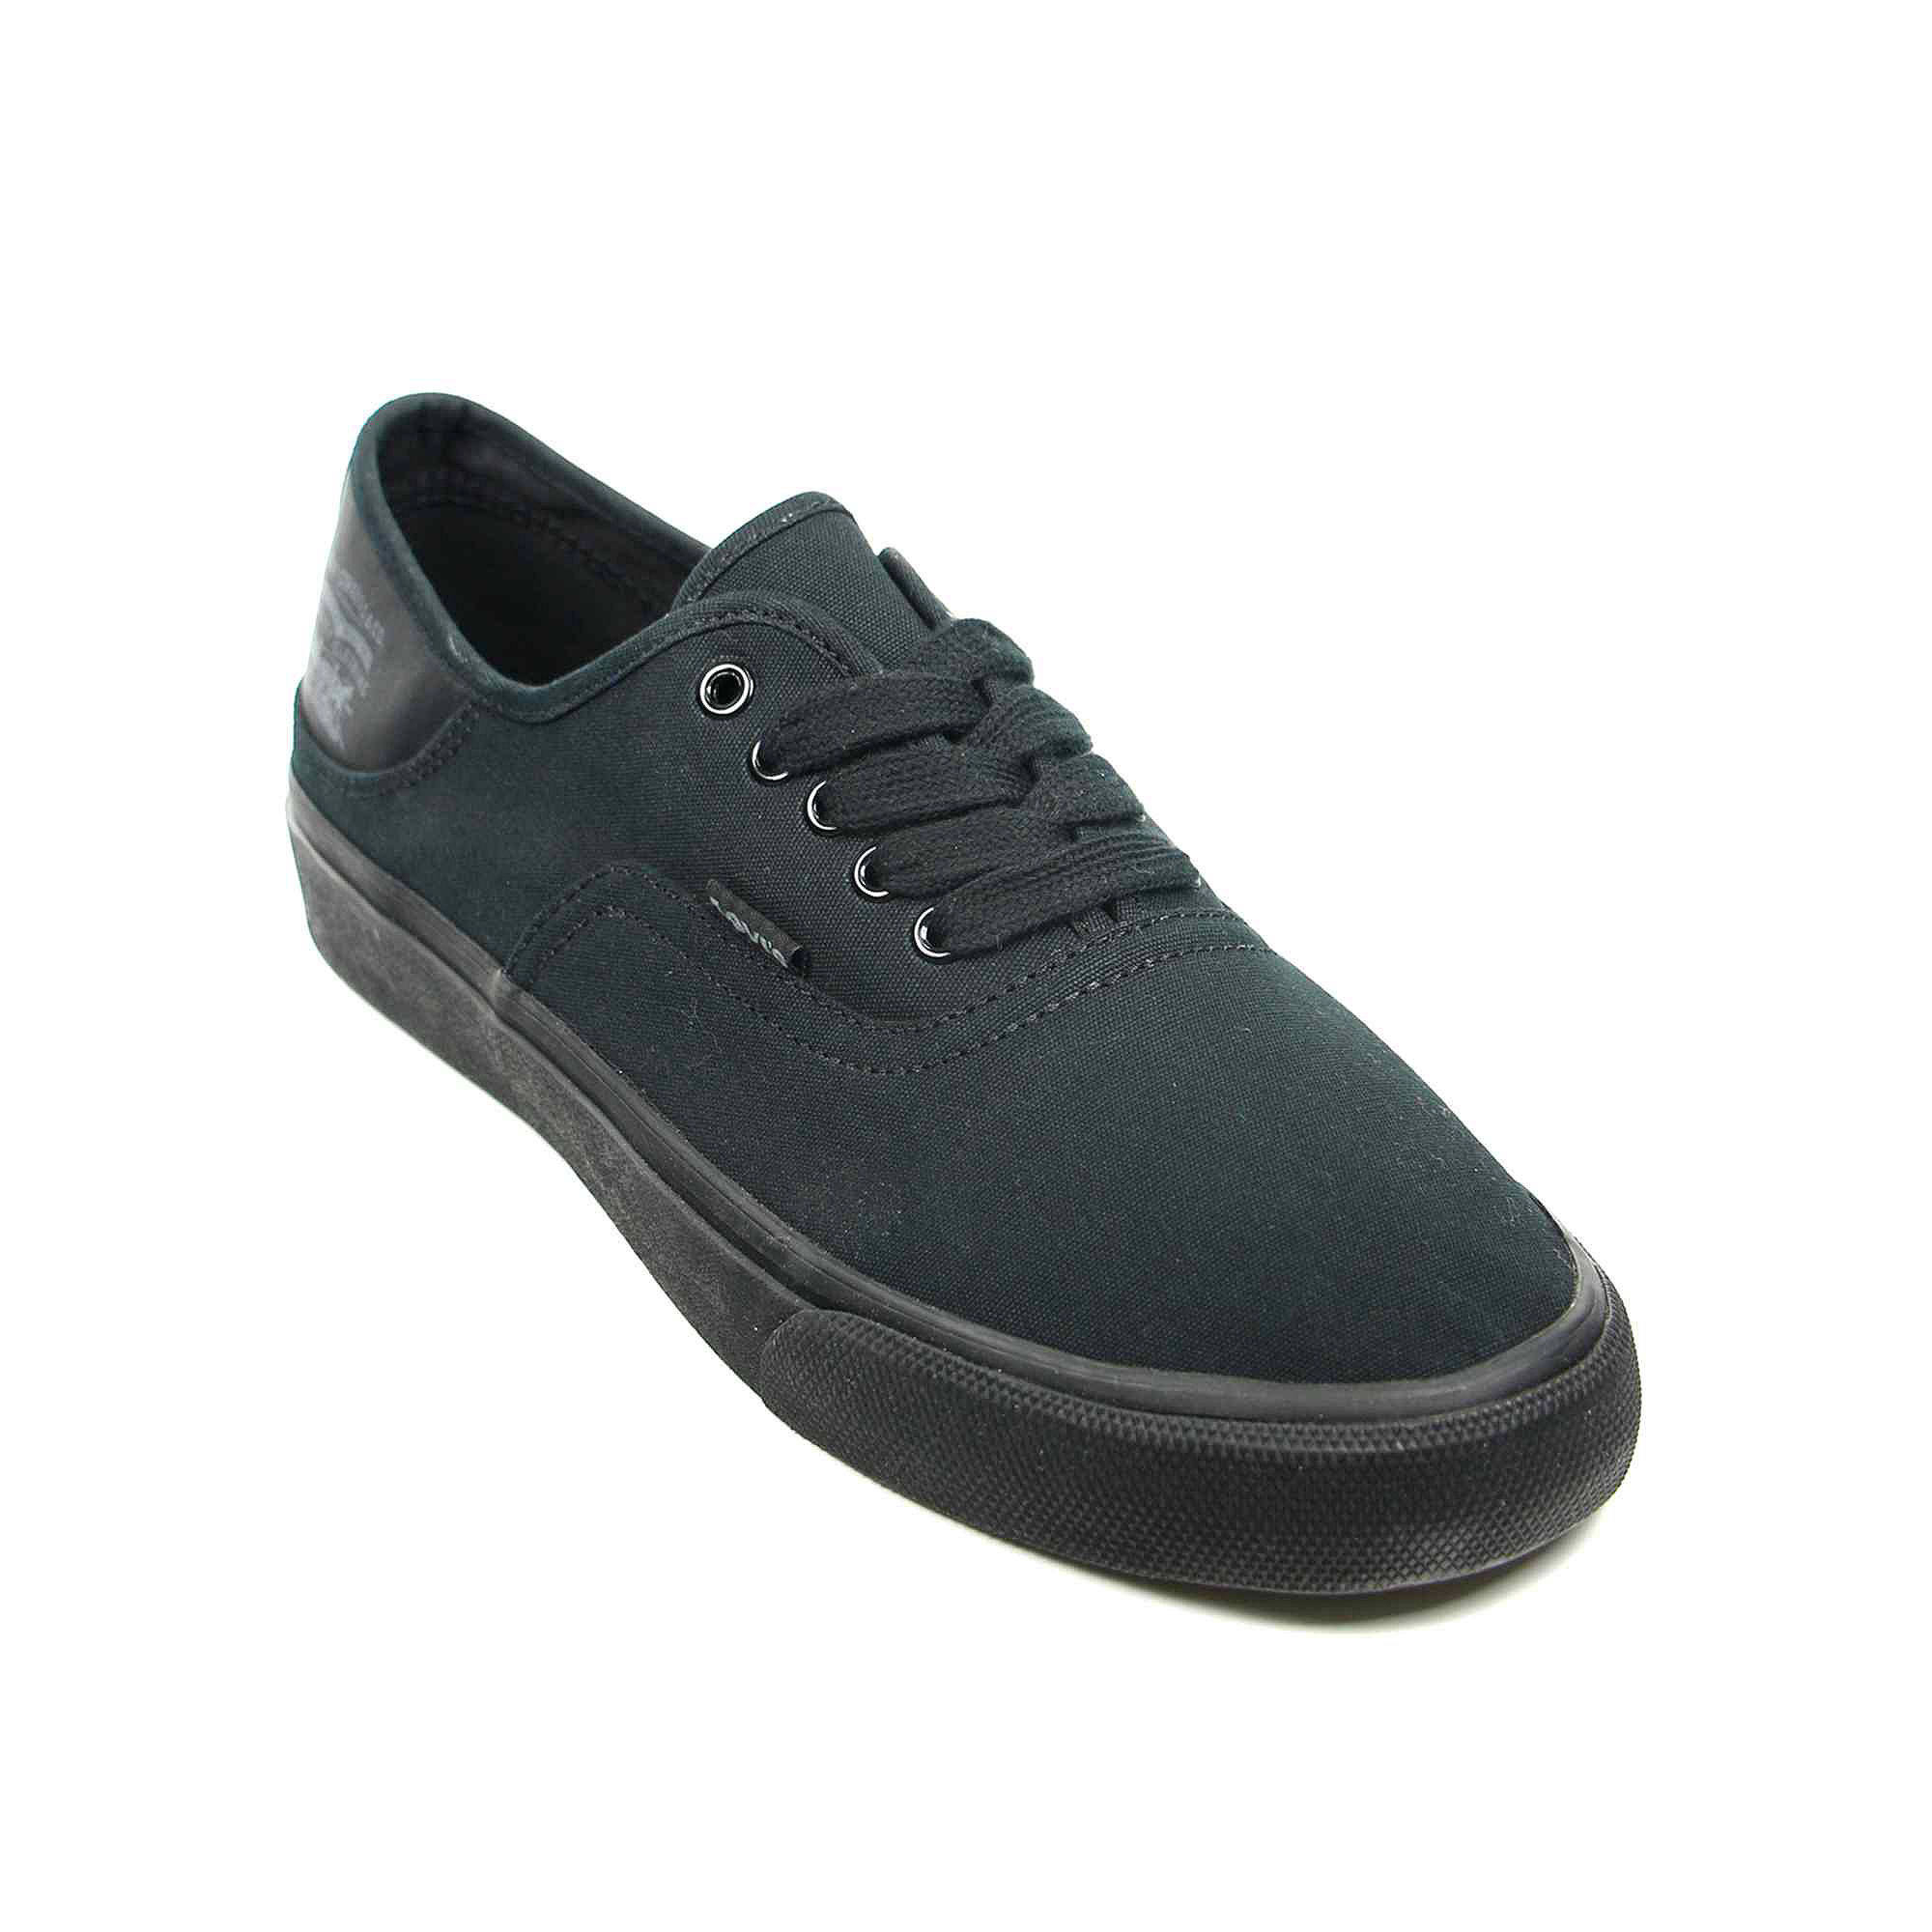 UPC 887326867940 product image for Levis Jordy Buck Mens Sneakers | upcitemdb.com